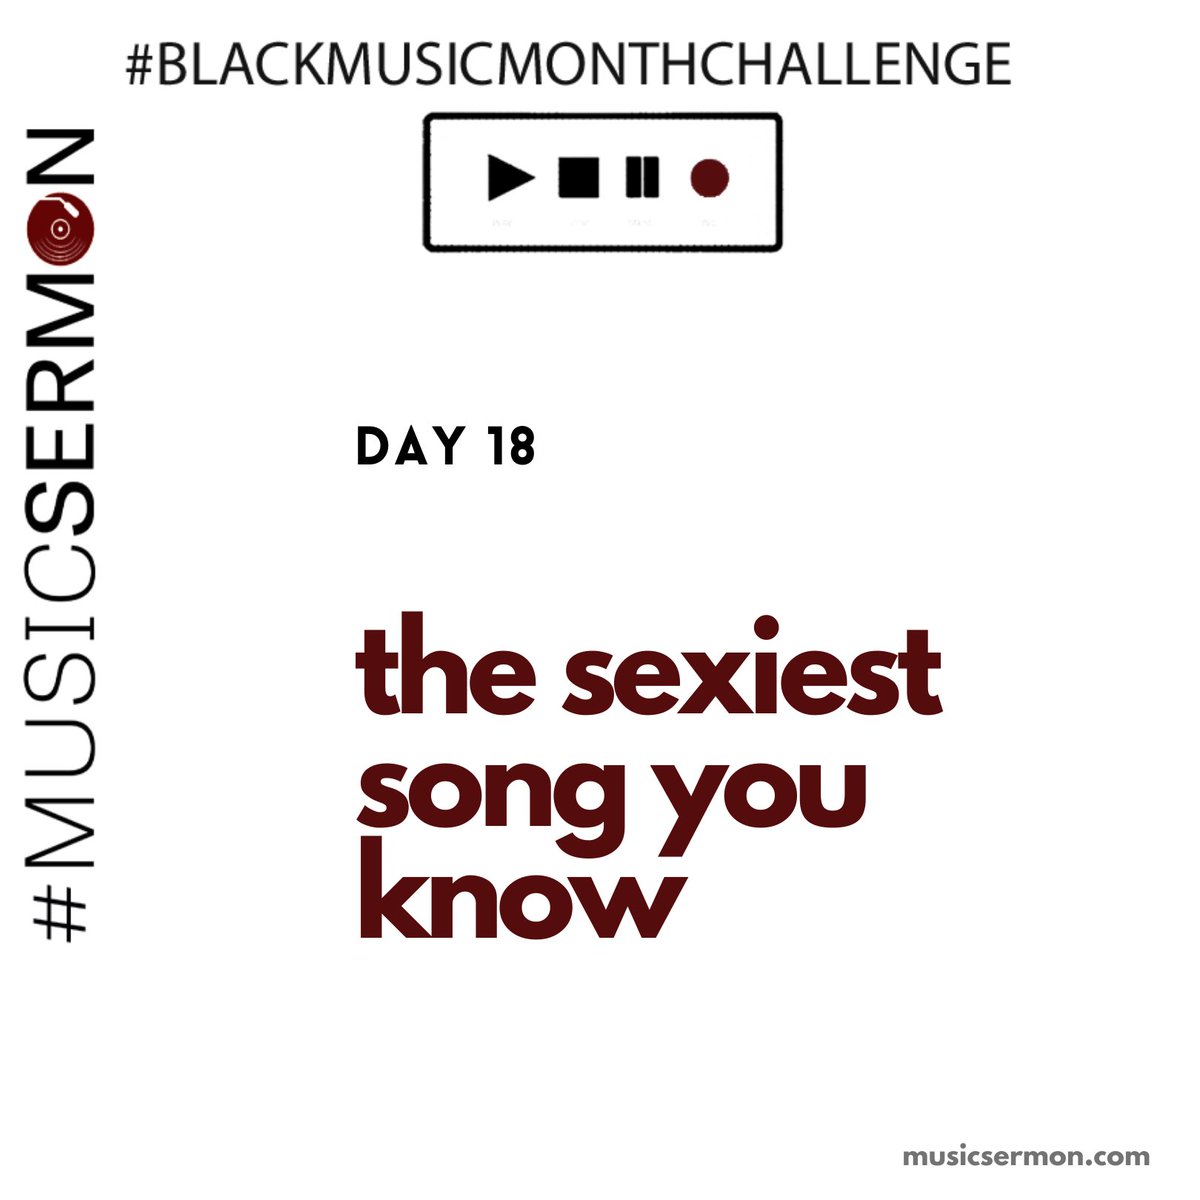 Yesterday, we celebrated  #Juneteenth   with the Blackest songs we could think of.Today, for Day 18 of the  #BlackMusicMonthChallenge, let’s shift gears: What’s the SEXIEST song you know?